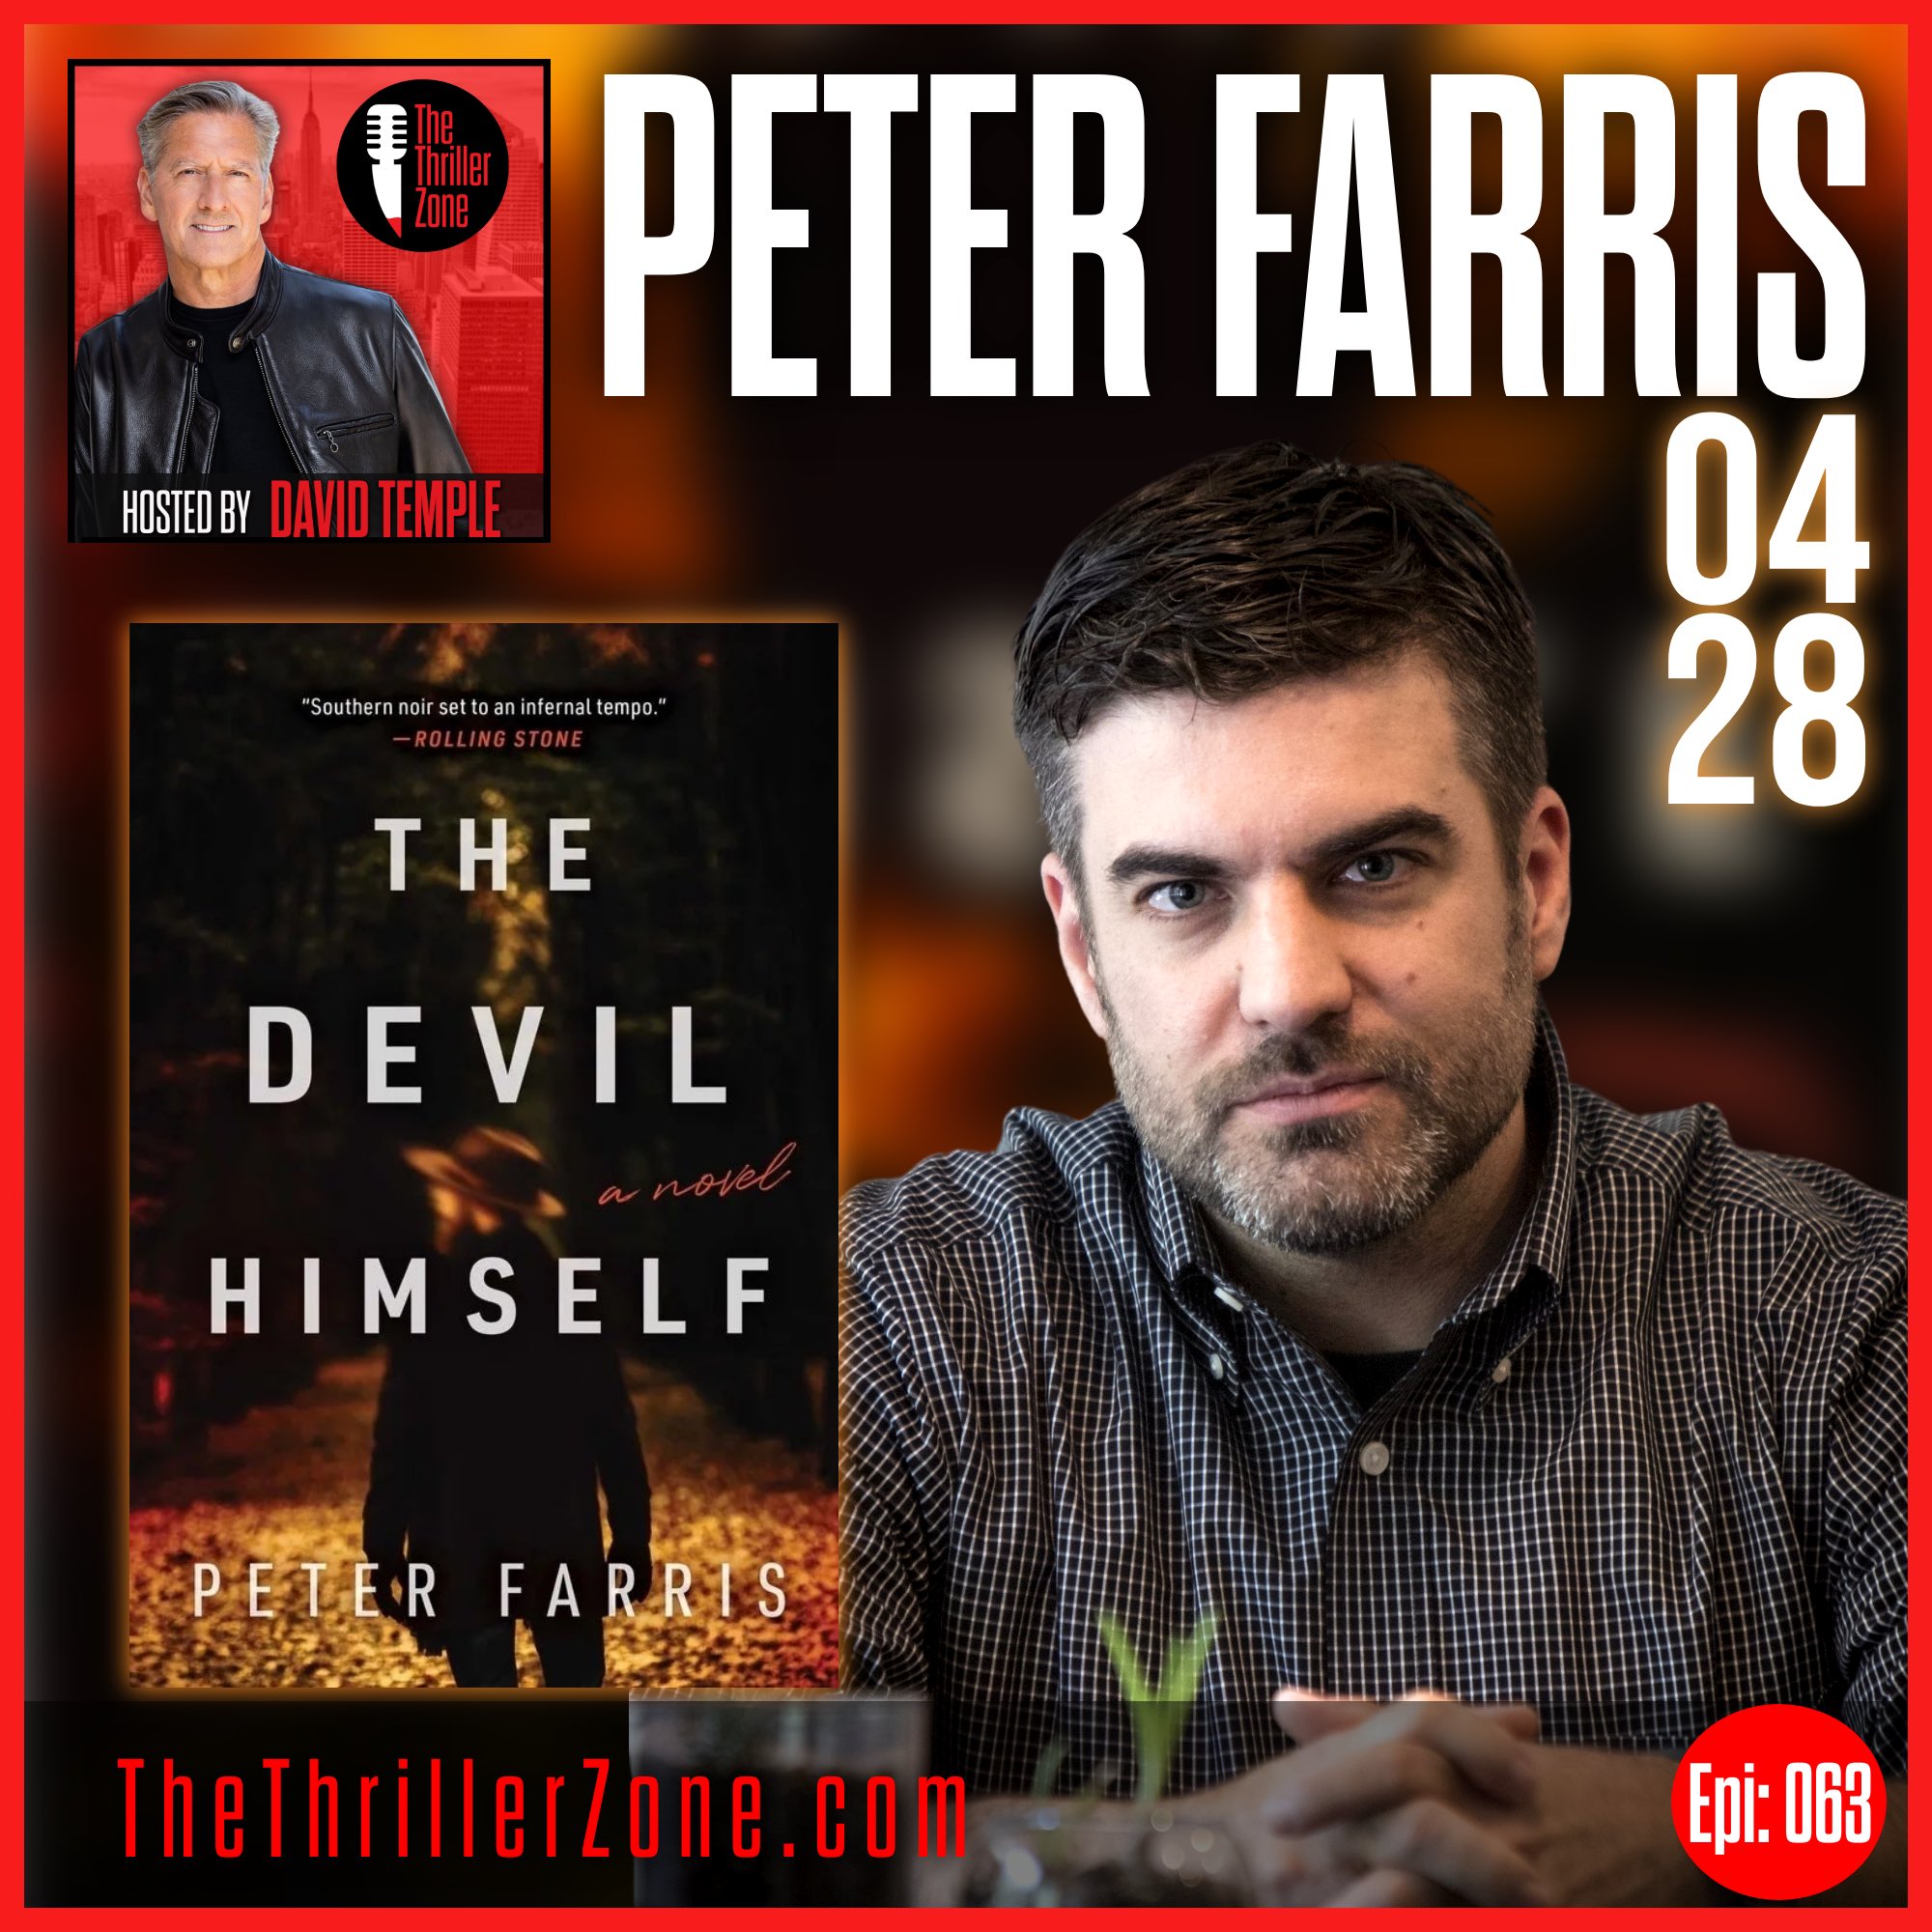 Peter Farris, author of The Devil Himself Image